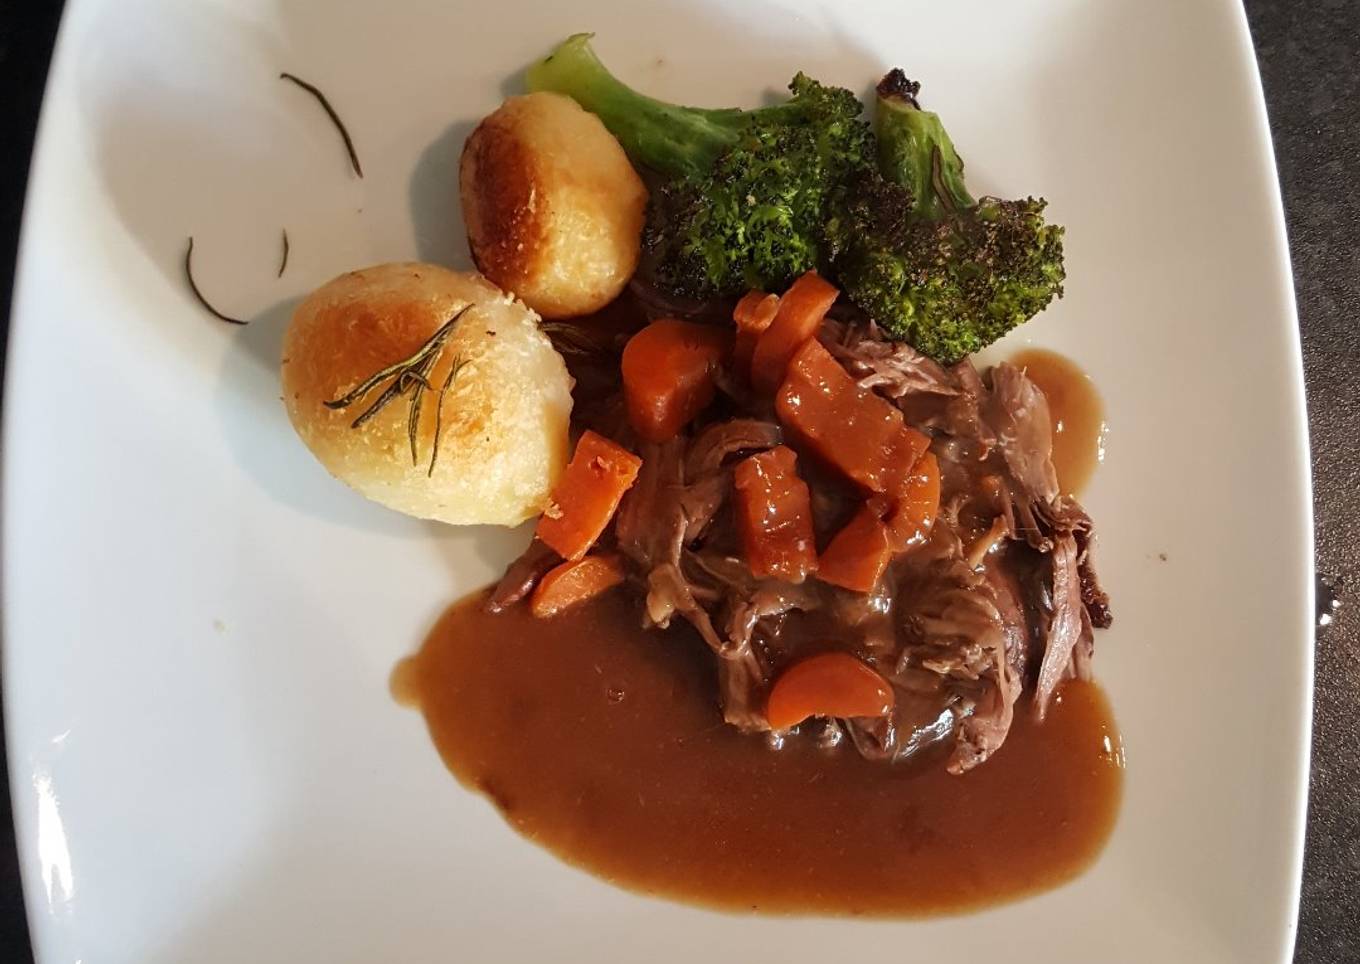 Slow Cooked Shredded Beef. Roast Spuds and Roasted Broccoli